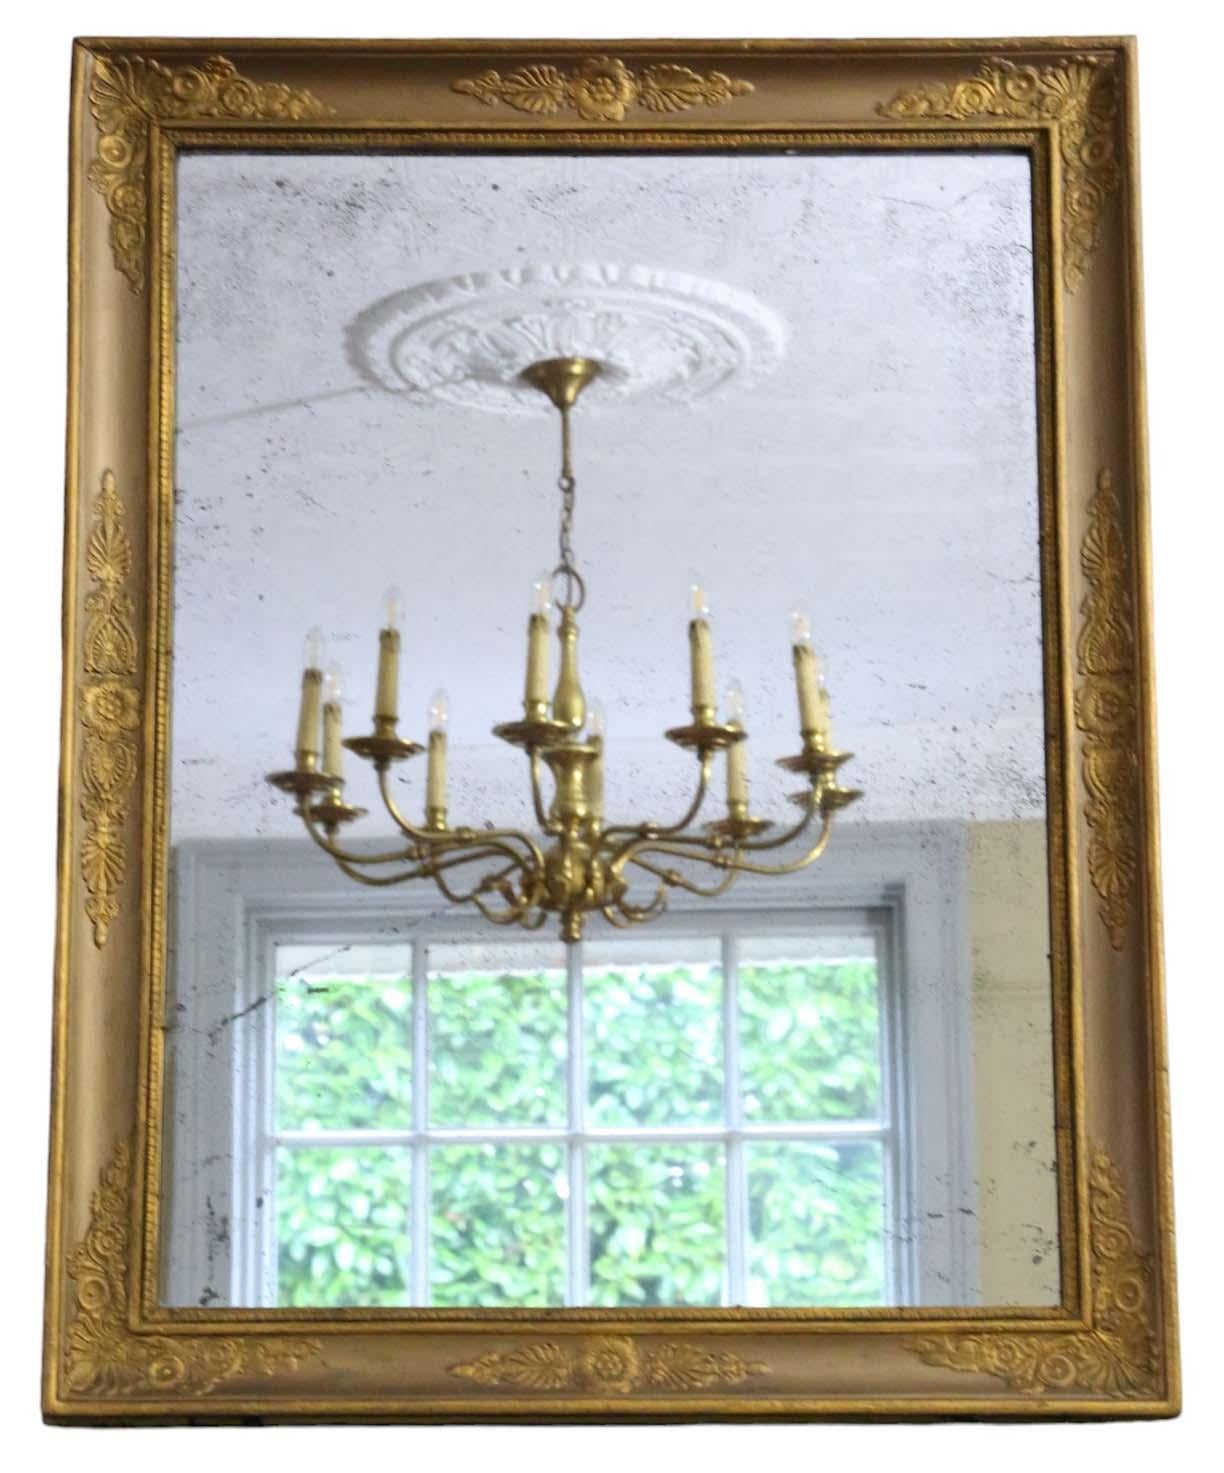 Antique large gilt overmantle wall mirror from the 19th Century, exuding quality craftsmanship.

This mirror enchants with its simple yet elegant design, bringing character to any suitable space. The frame is sturdy, with no loose joints.

The